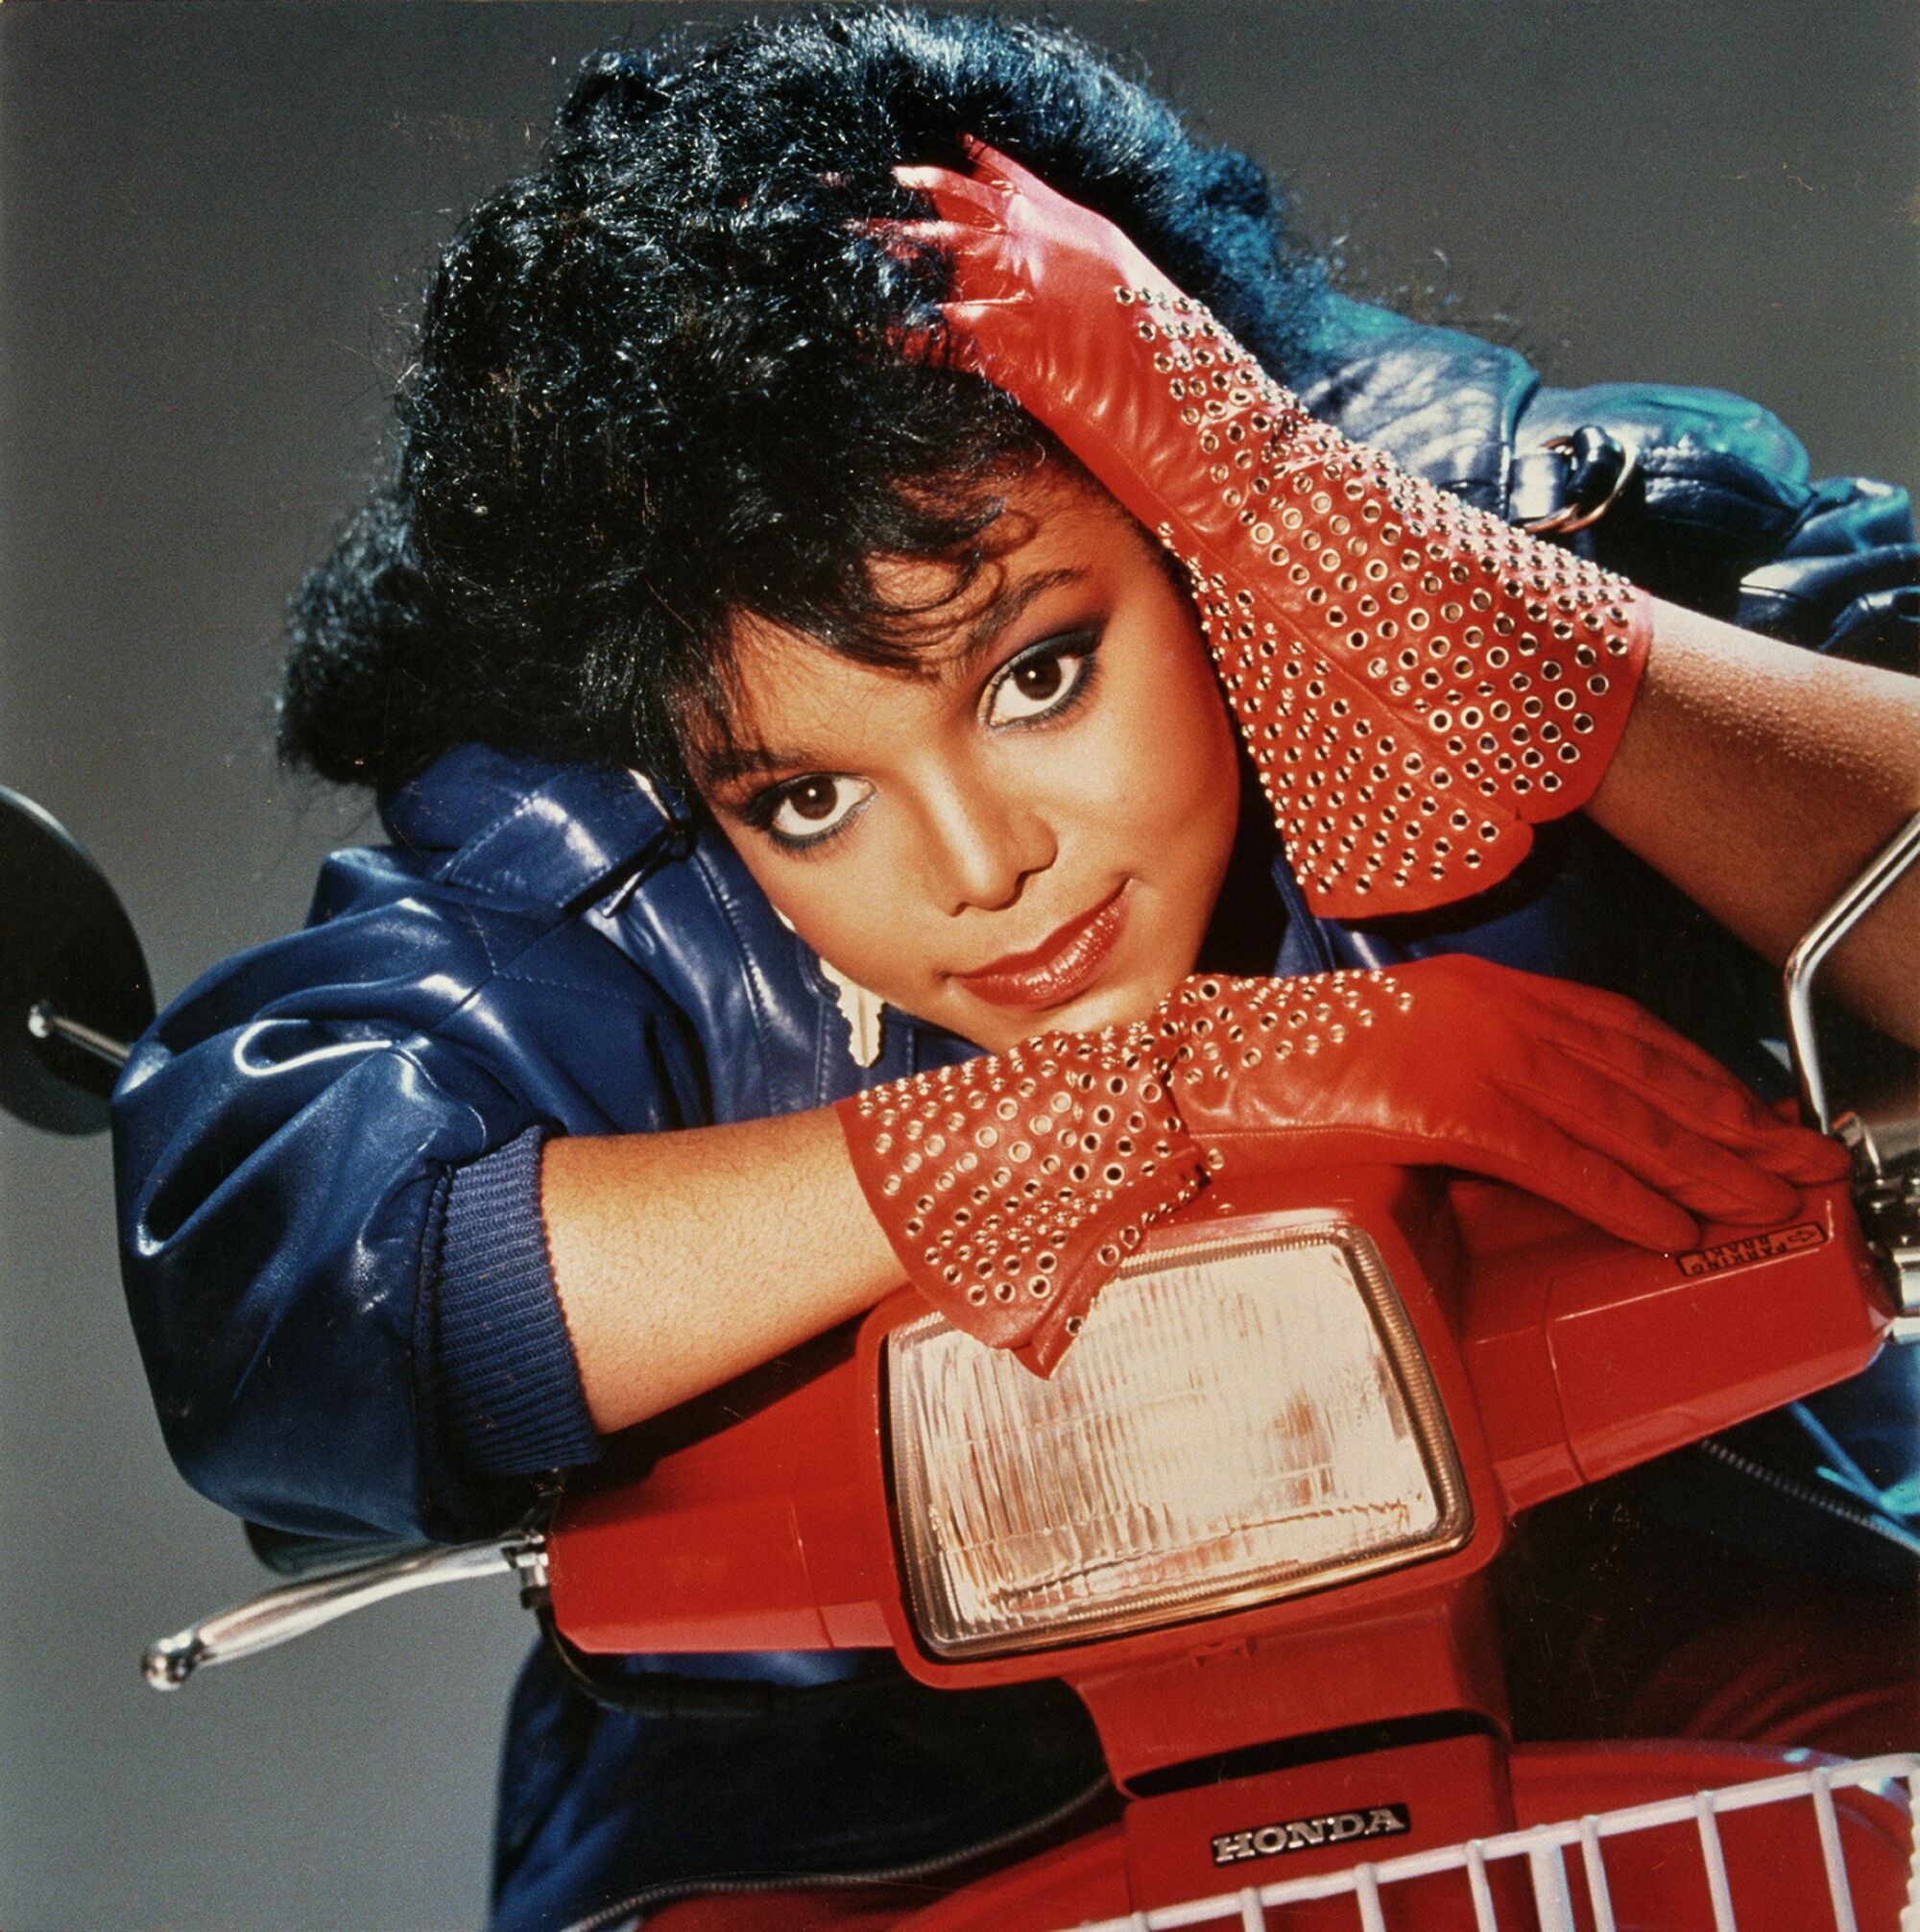 A young woman with red leather gloves rests her head on a red motorcycle